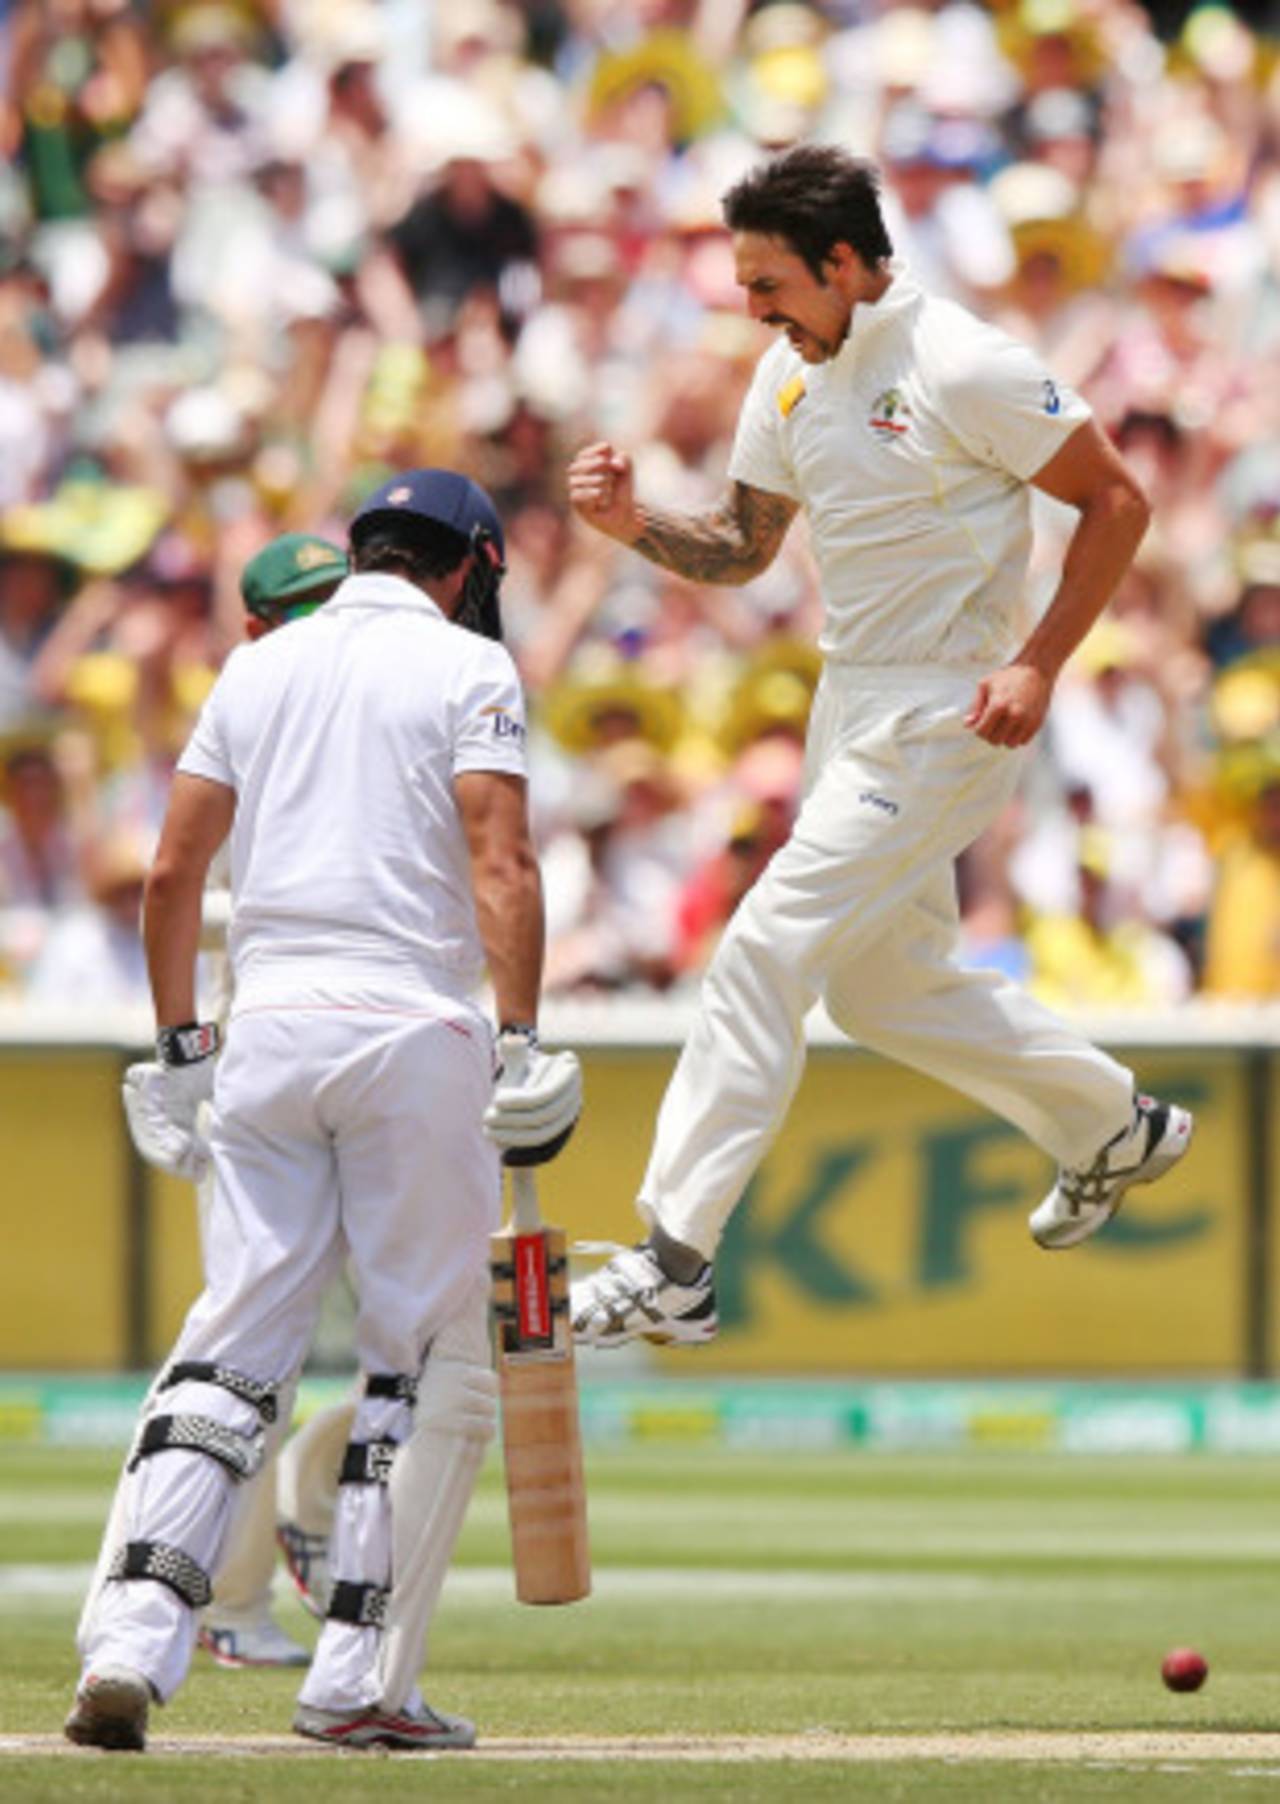 Mitchell Johnson trapped Alastair Cook lbw, Australia v England, 4th Test, Melbourne, 3rd day, December 28, 2013